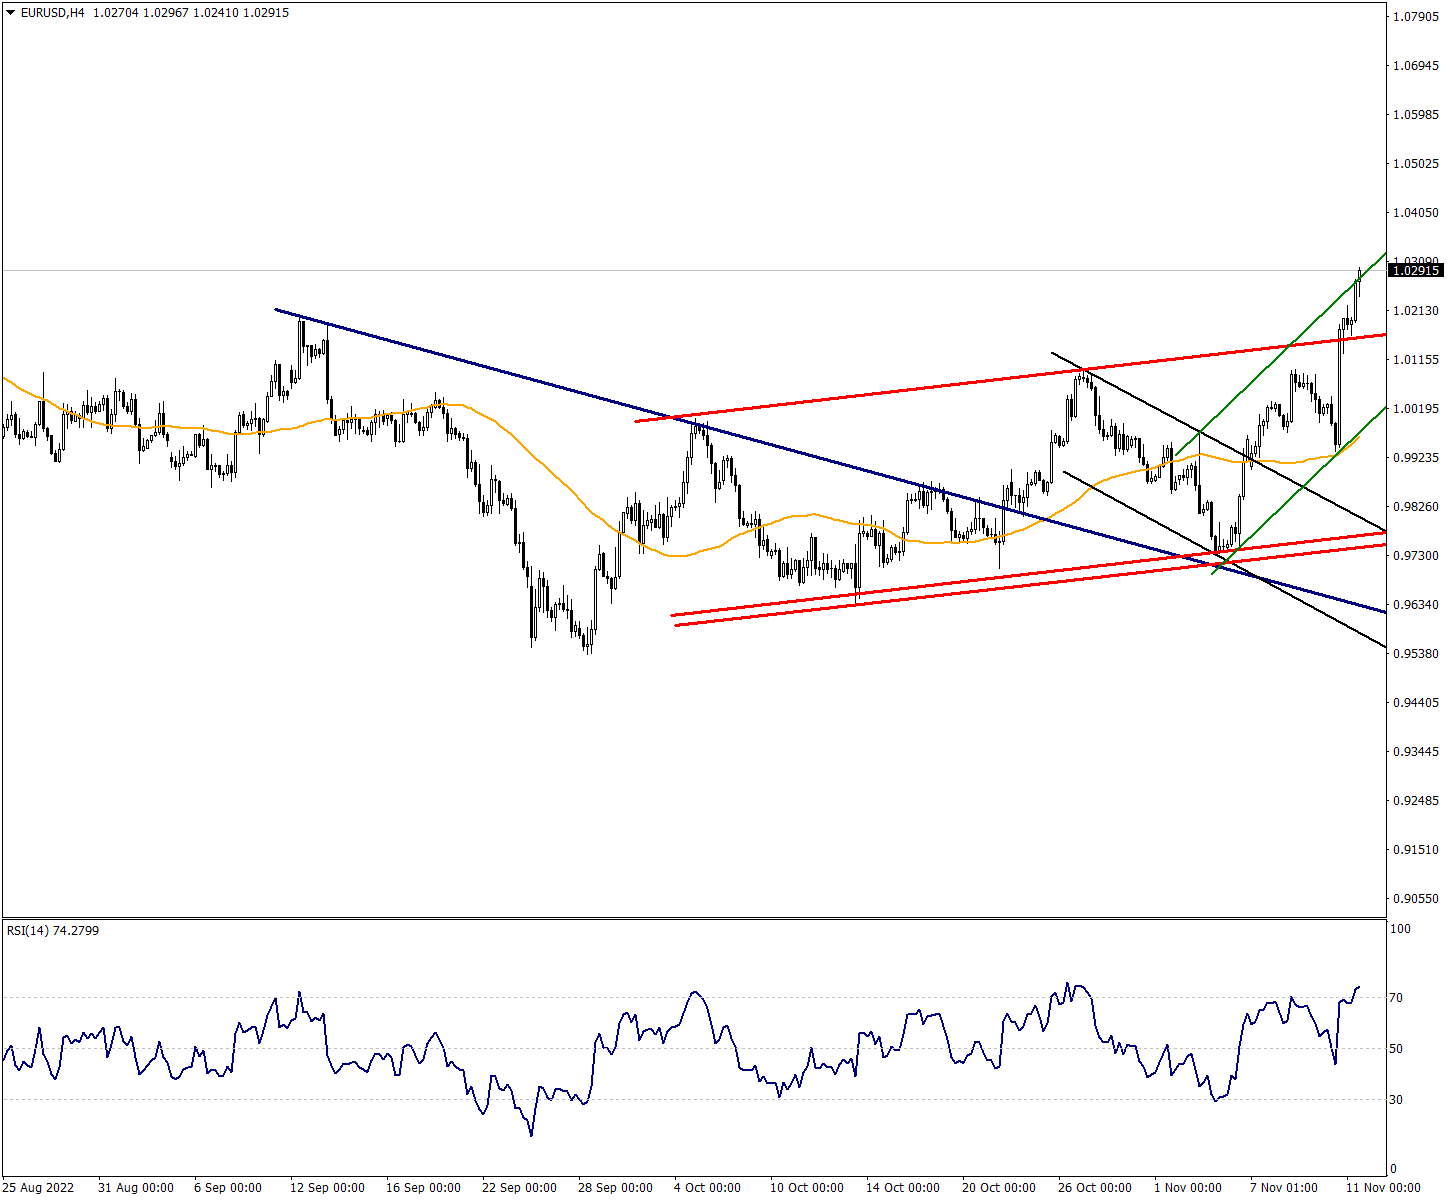 EURUSD Performed its Channel Change